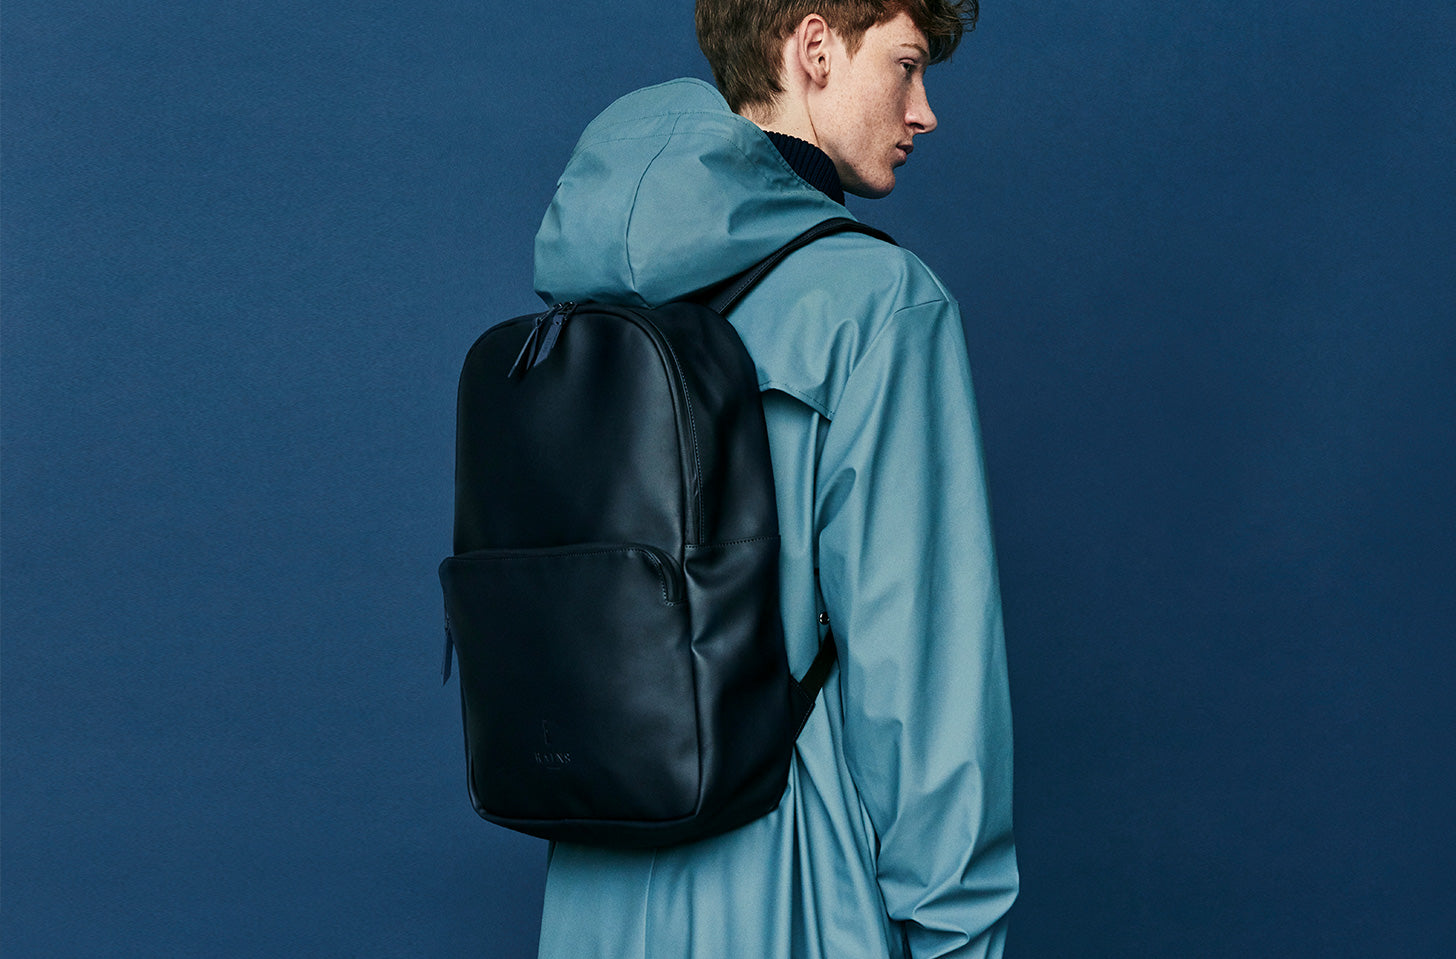 Our Guide To The Rains Backpack Range